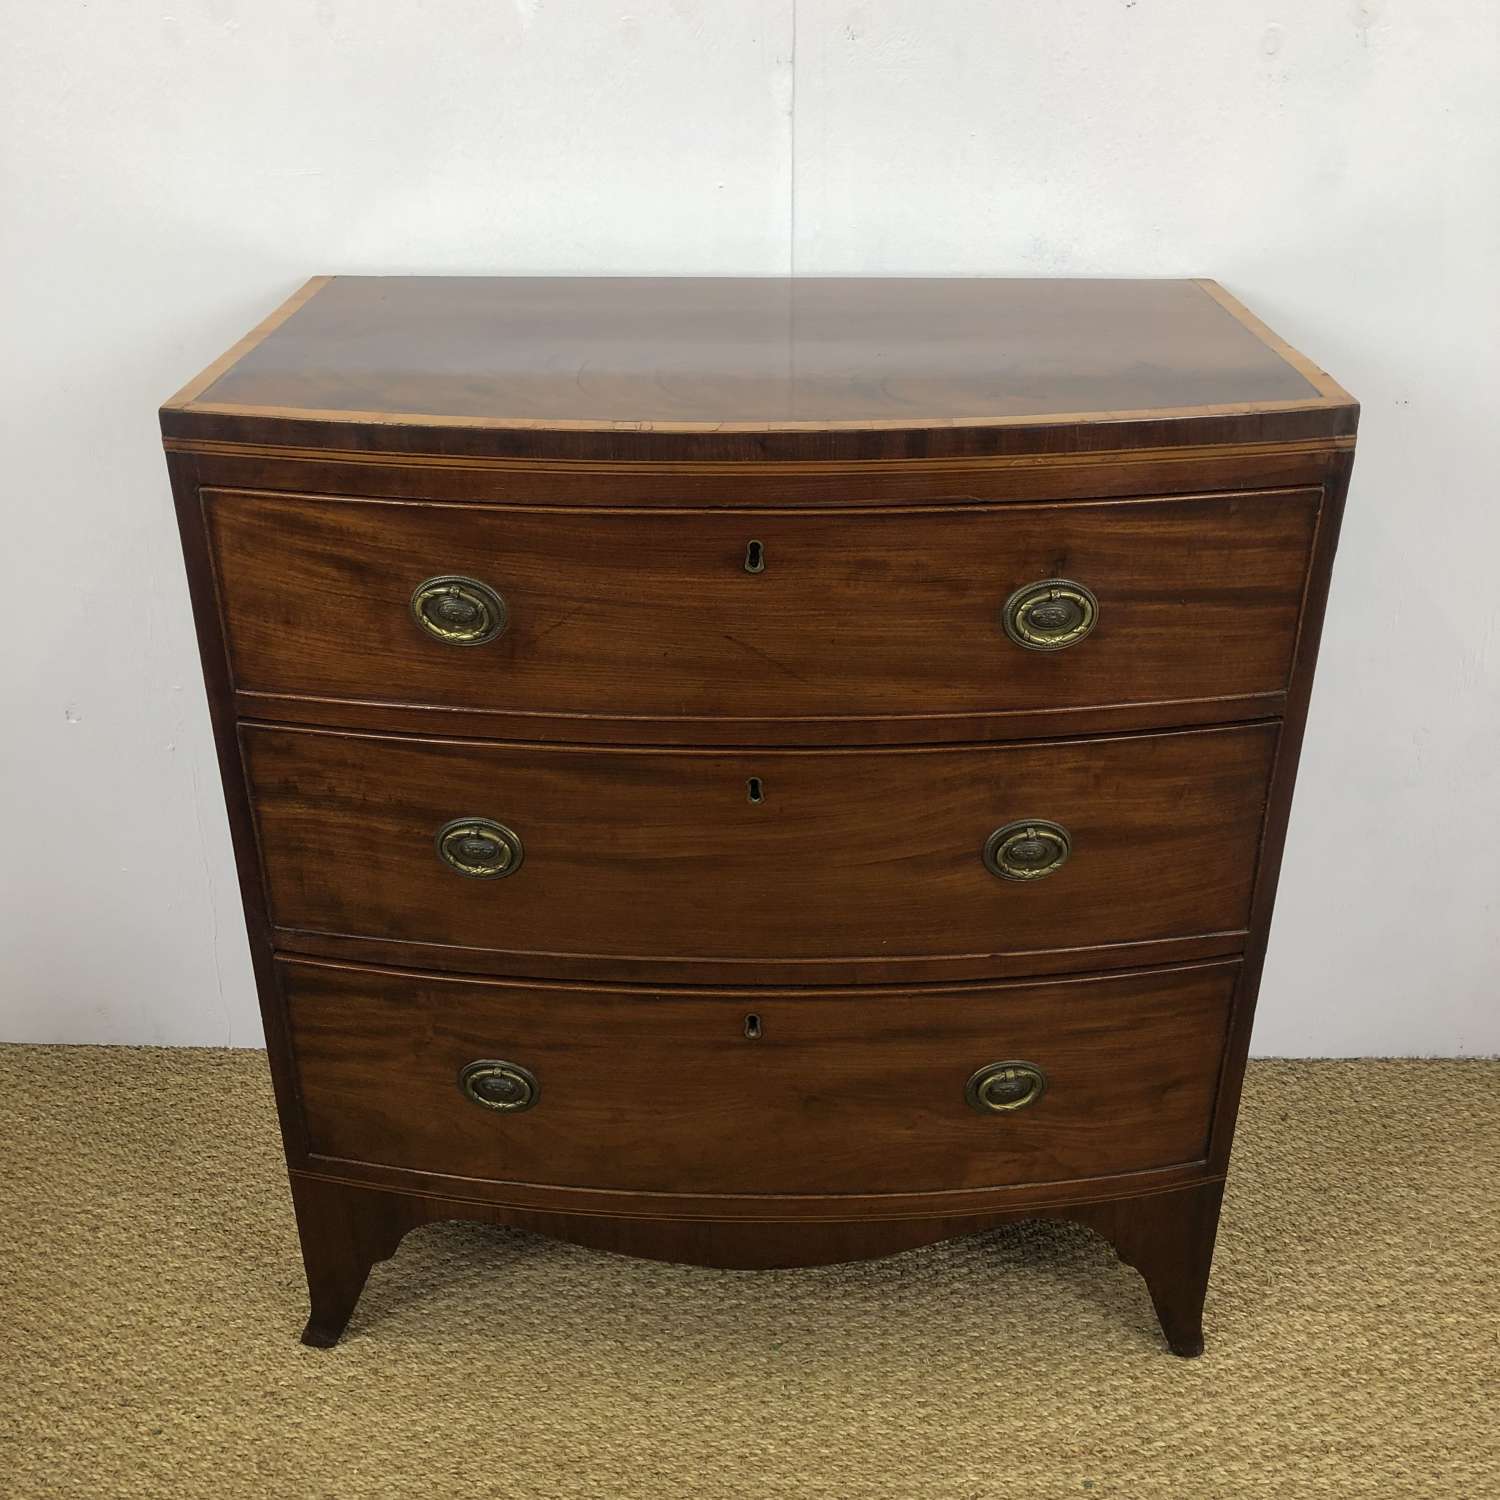 A 19thC Bow Front Chest of Drawers